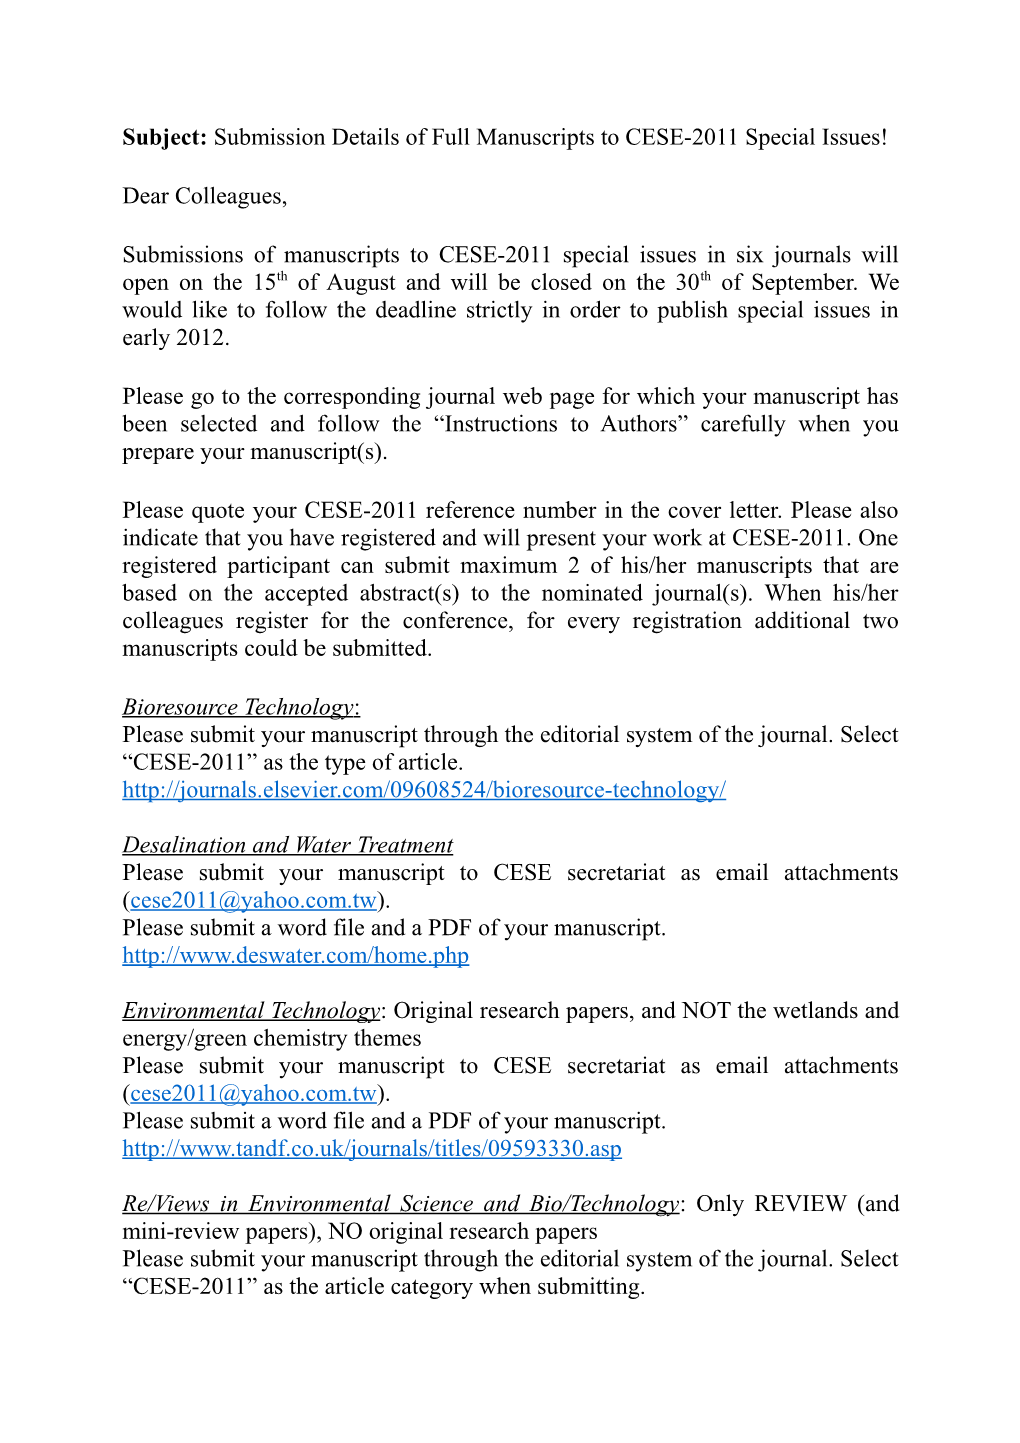 Subject: Submission Details of Full Manuscripts to CESE-2011 Special Issues!